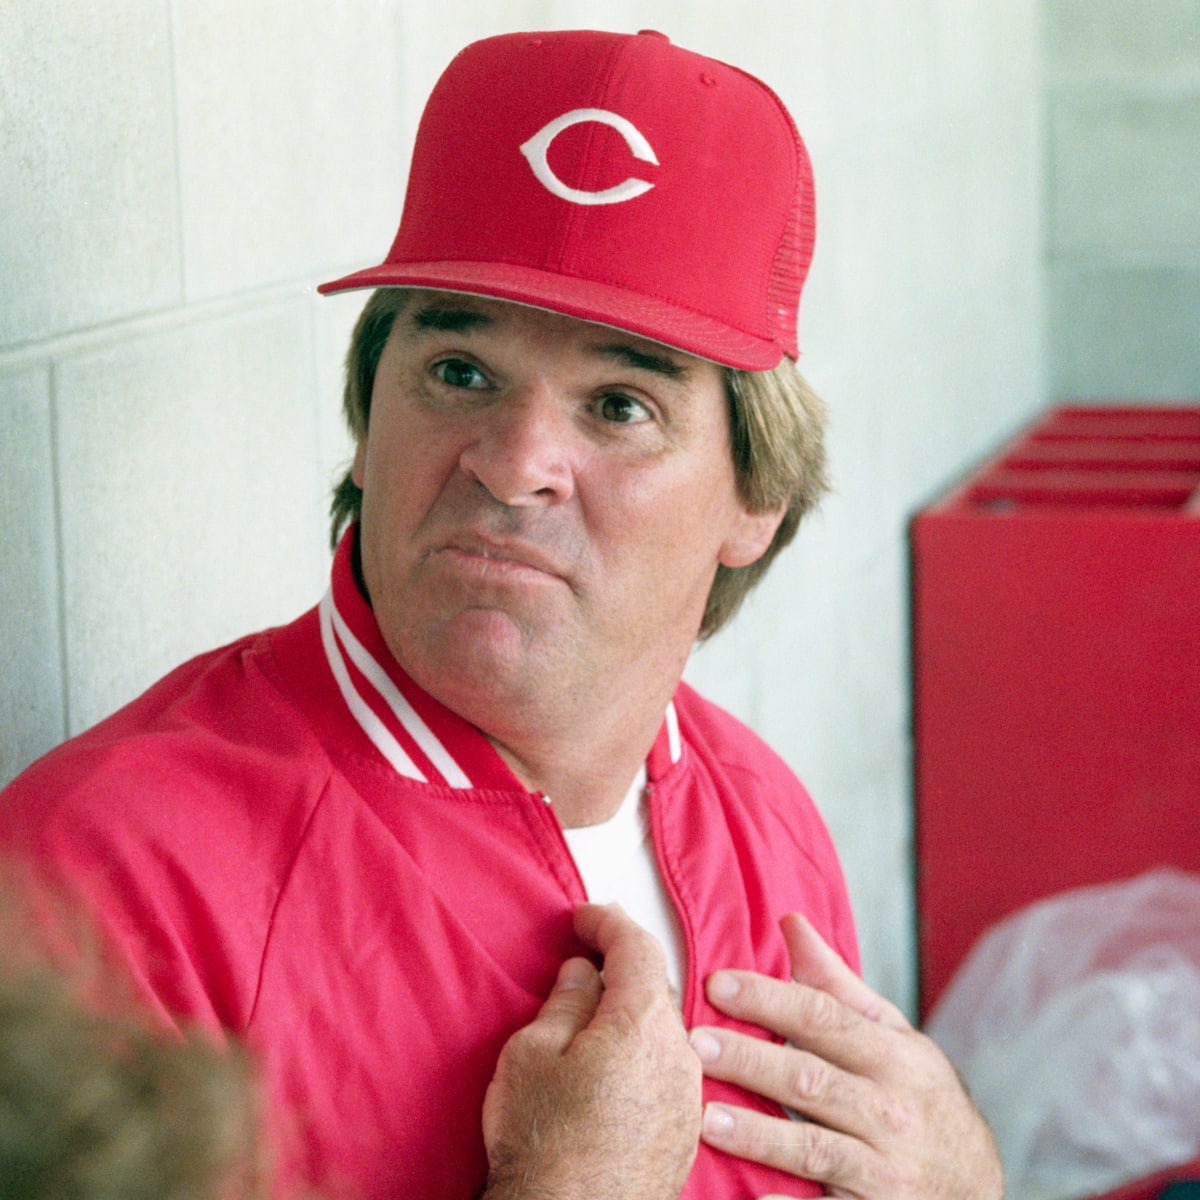 Pete Rose on critics of his appearance with the 1980 Phillies team